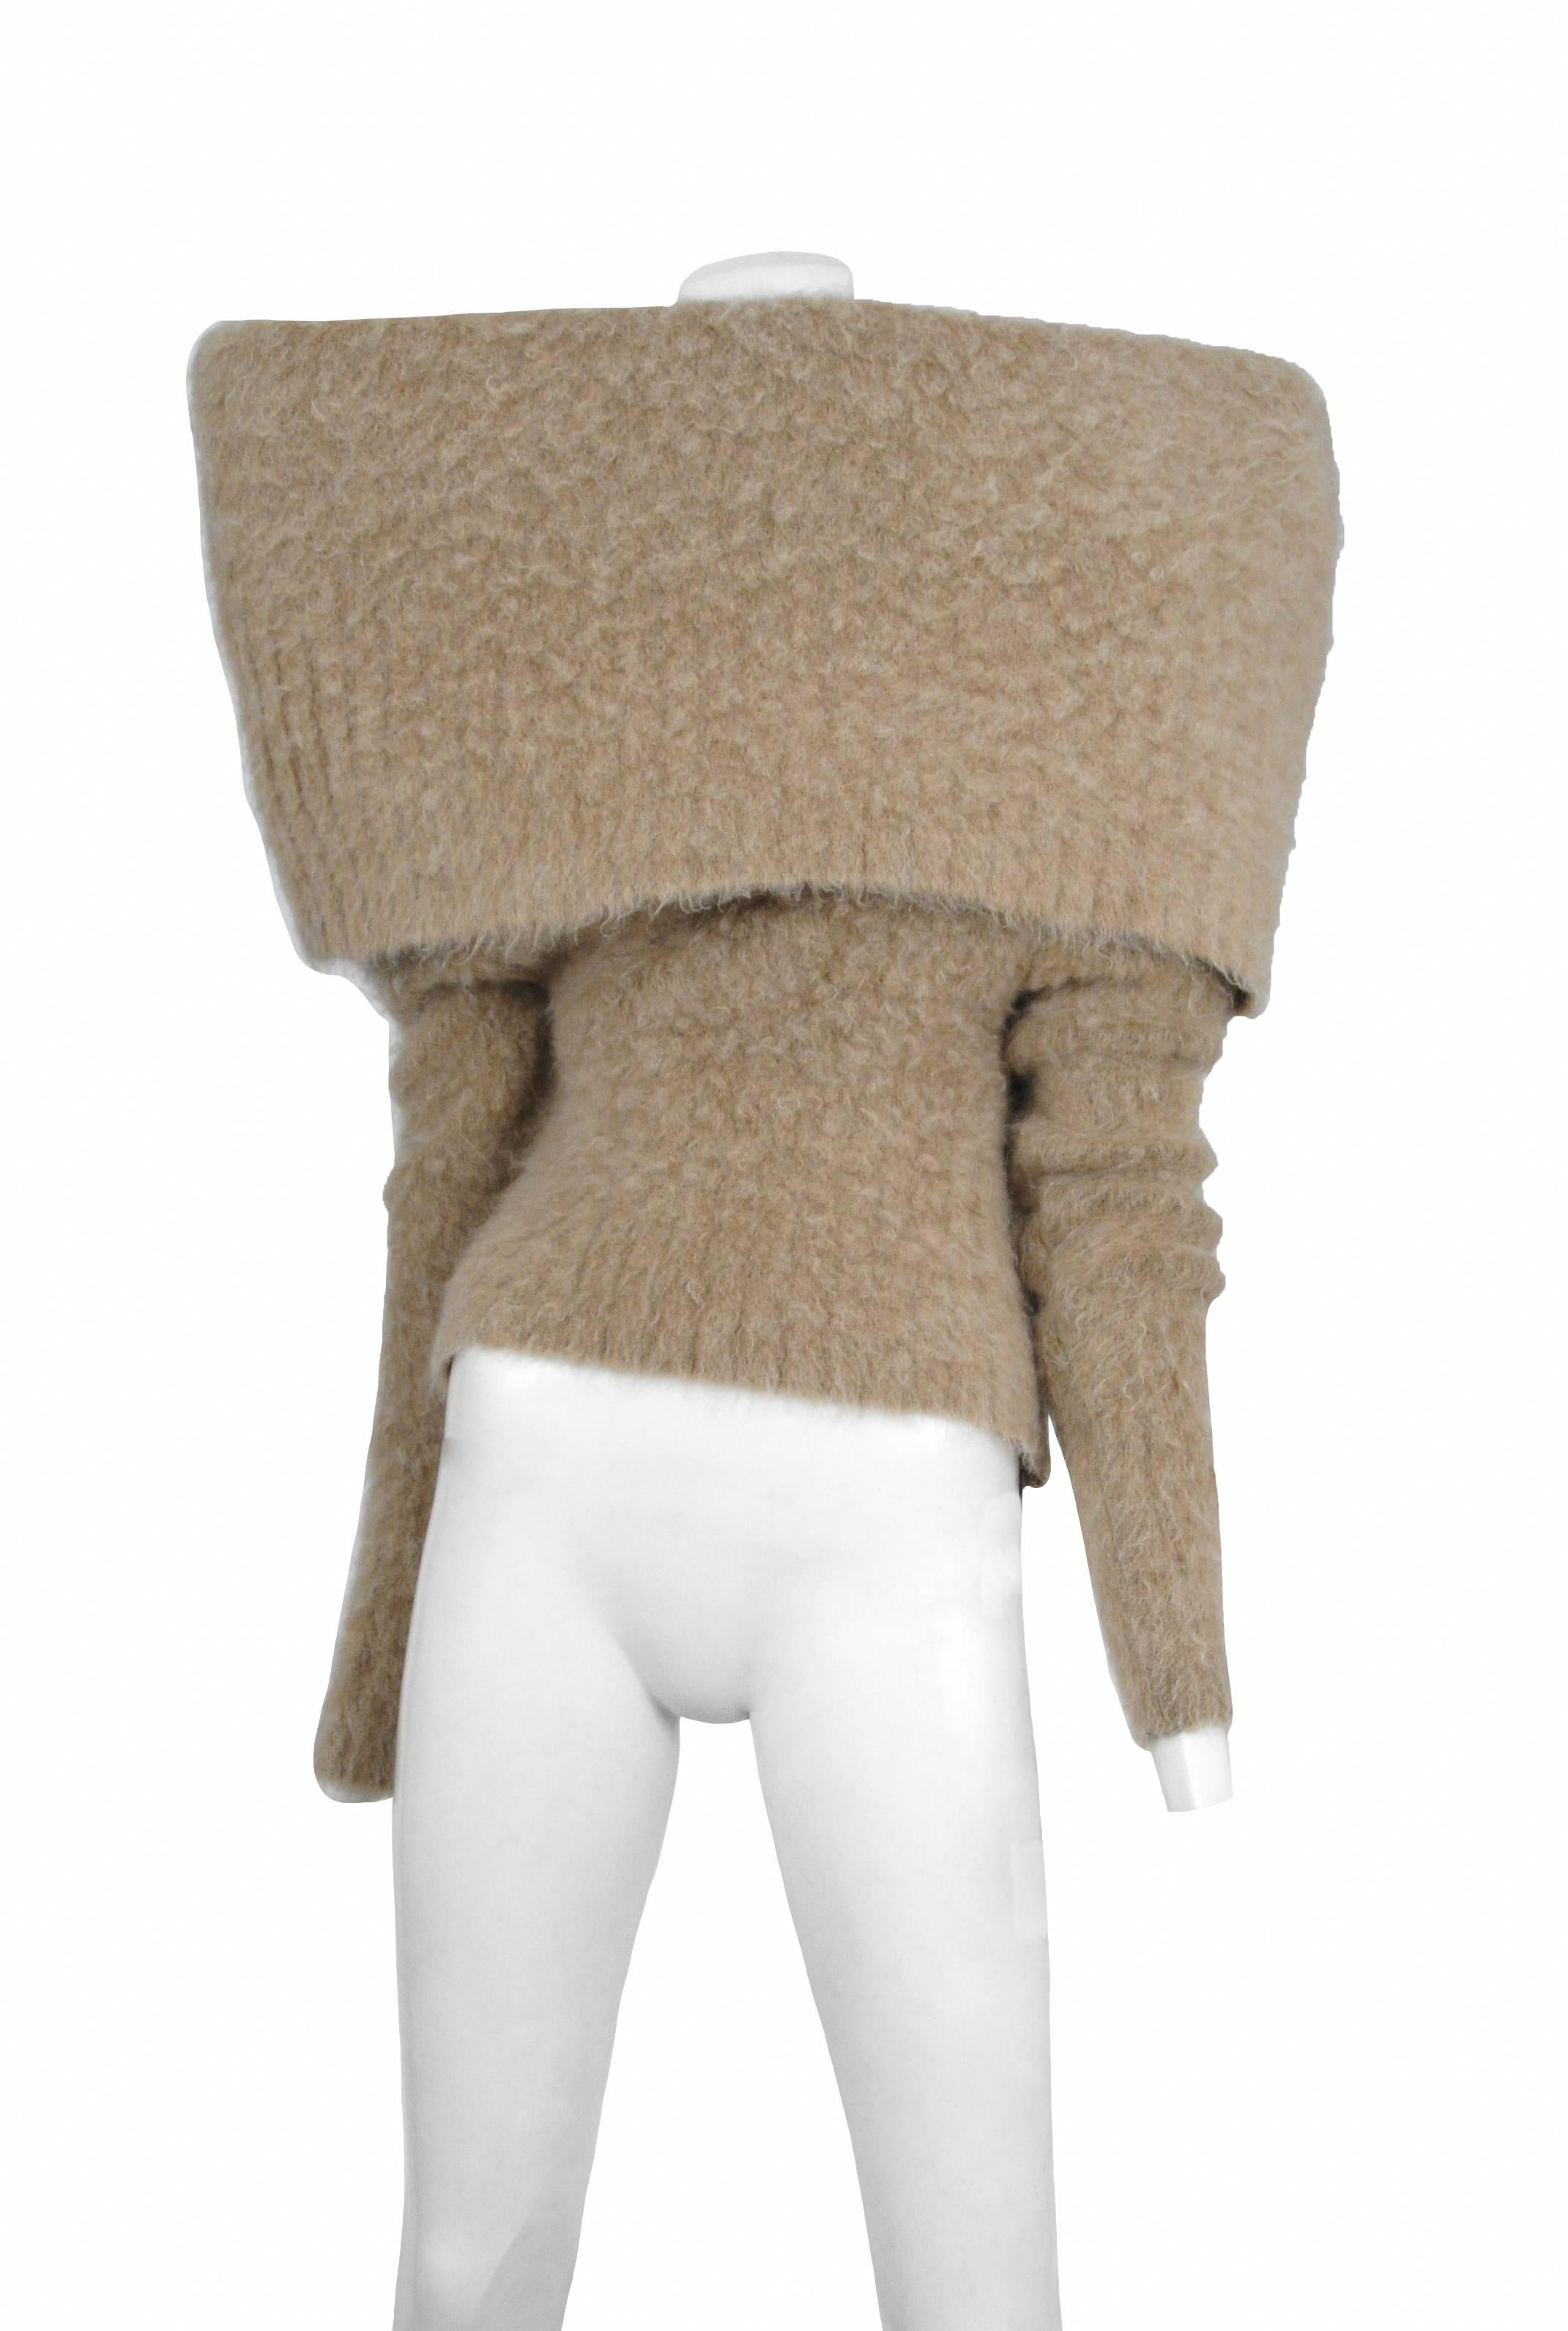 Vintage Maison Martin Margiela beige mohair wool blend long sleeve sweater with oversize fold over collar. Circa 2008/2009.
Please inquire for additional images.